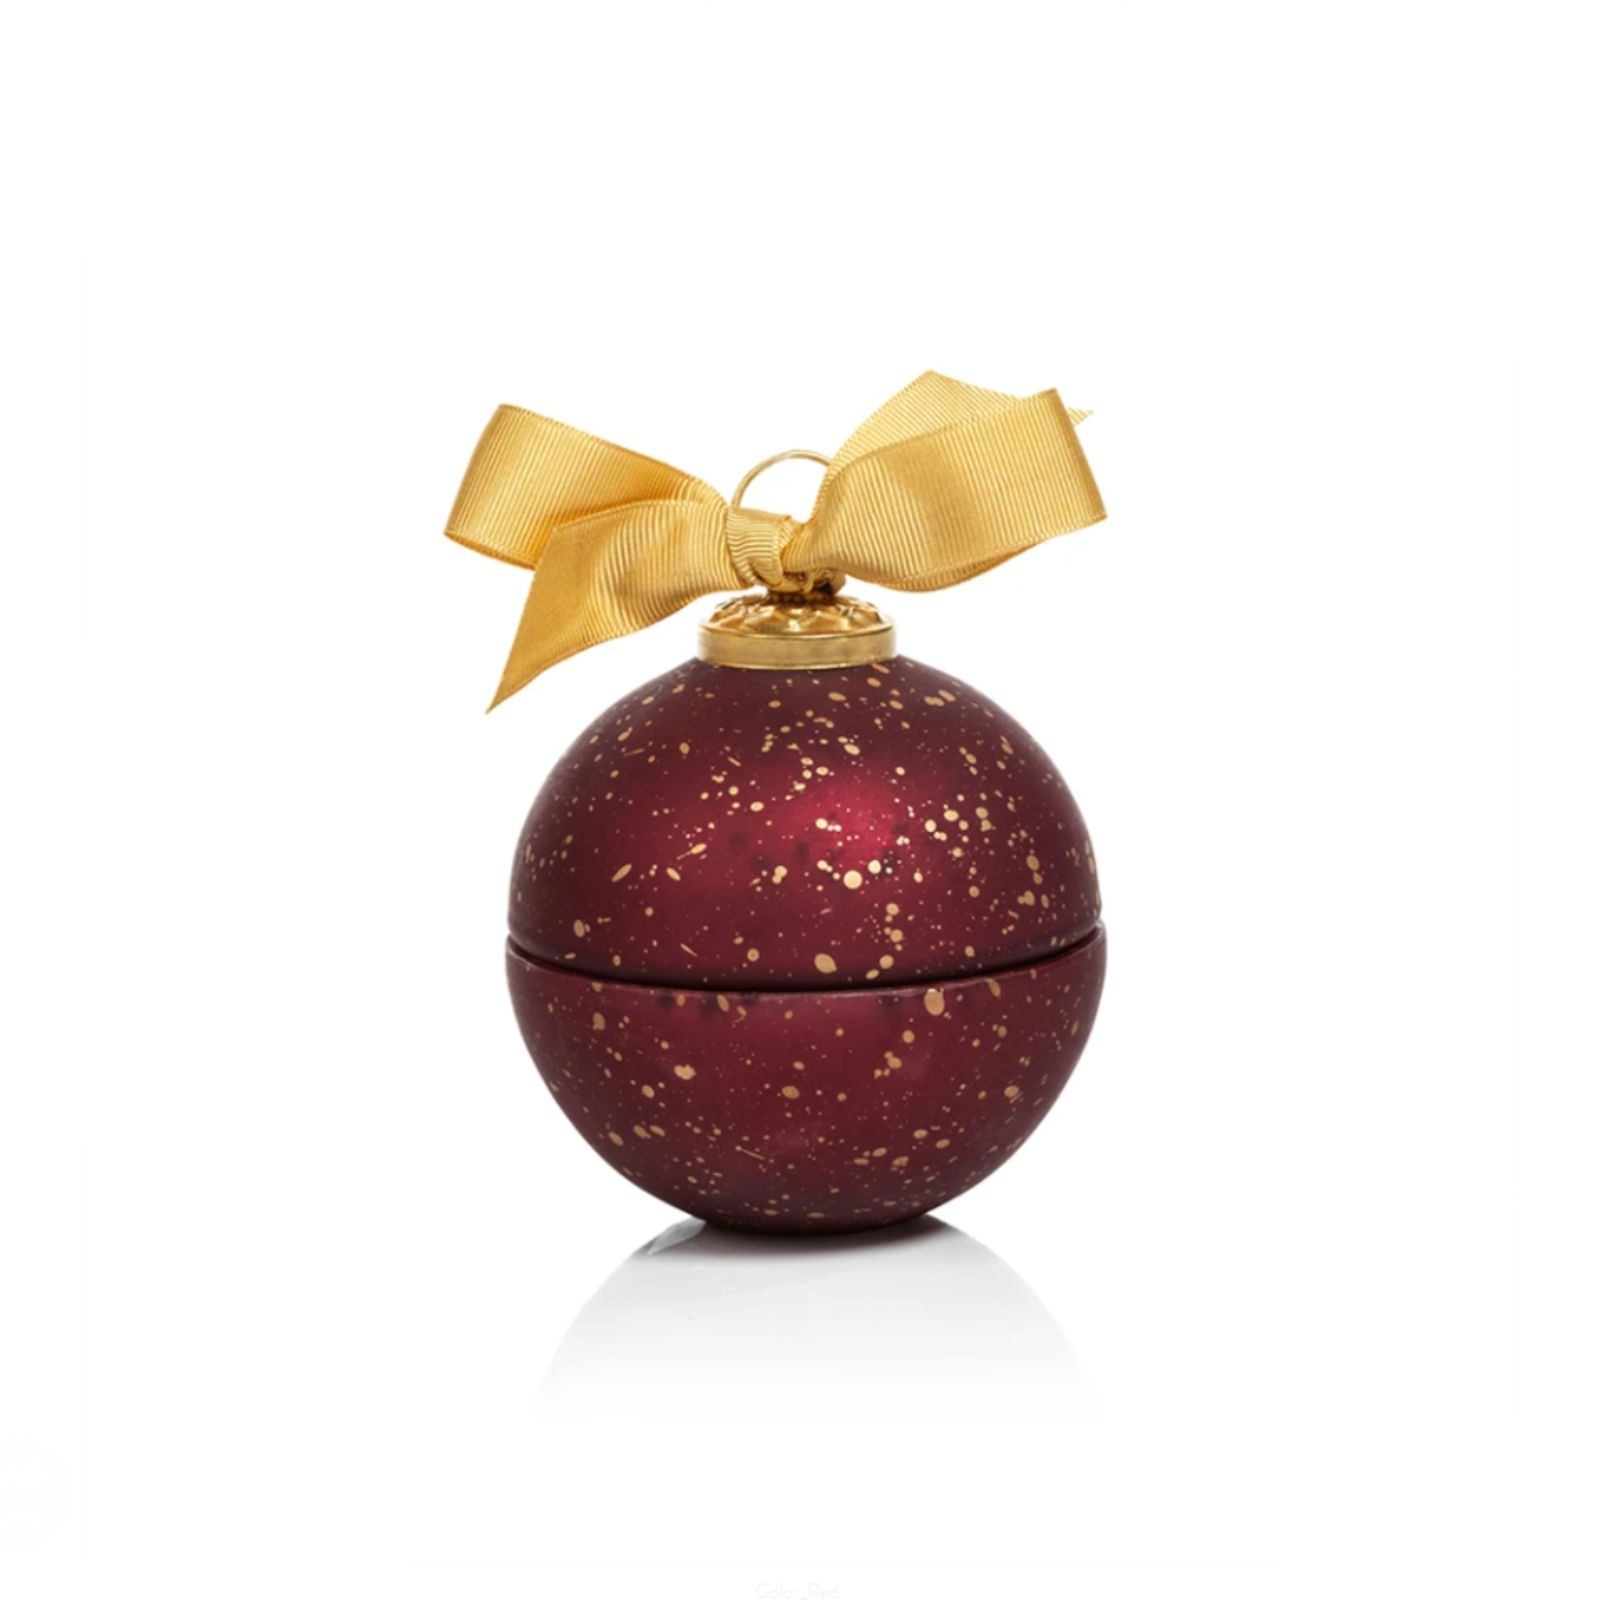 Zodax Scented Candle Ornament Burgundy IG-2604 loading=